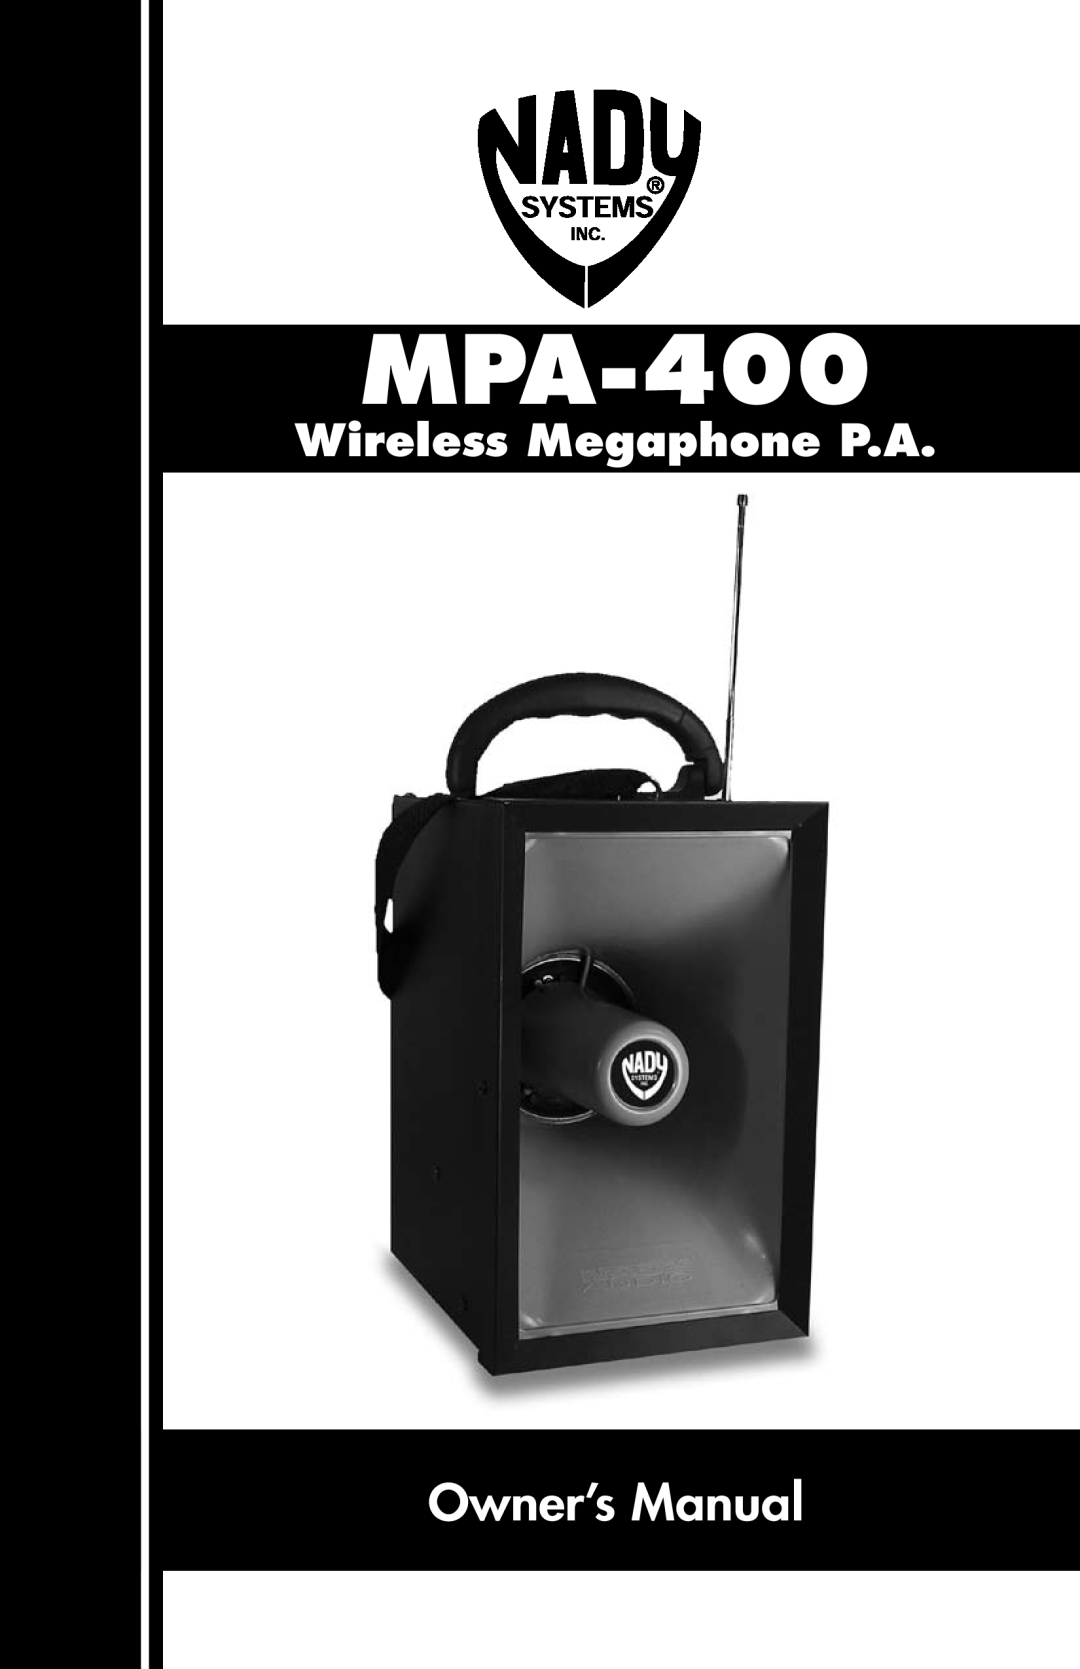 Nady Systems MPA-400 owner manual Owner’s Manual, Wireless Megaphone P.A 